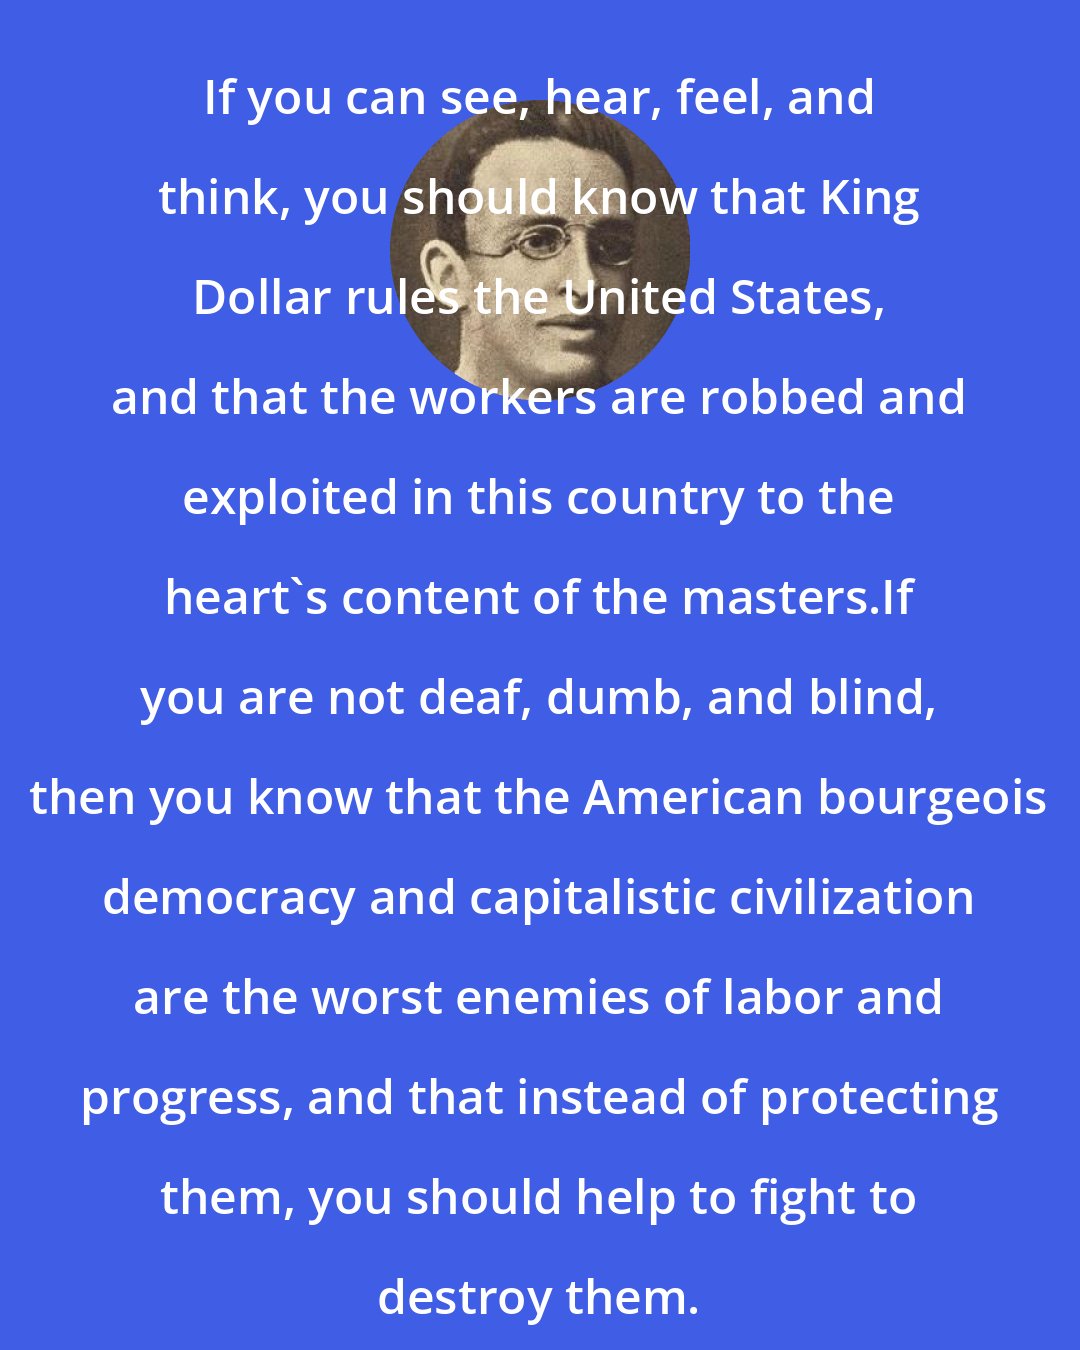 Alexander Berkman: If you can see, hear, feel, and think, you should know that King Dollar rules the United States, and that the workers are robbed and exploited in this country to the heart's content of the masters.If you are not deaf, dumb, and blind, then you know that the American bourgeois democracy and capitalistic civilization are the worst enemies of labor and progress, and that instead of protecting them, you should help to fight to destroy them.